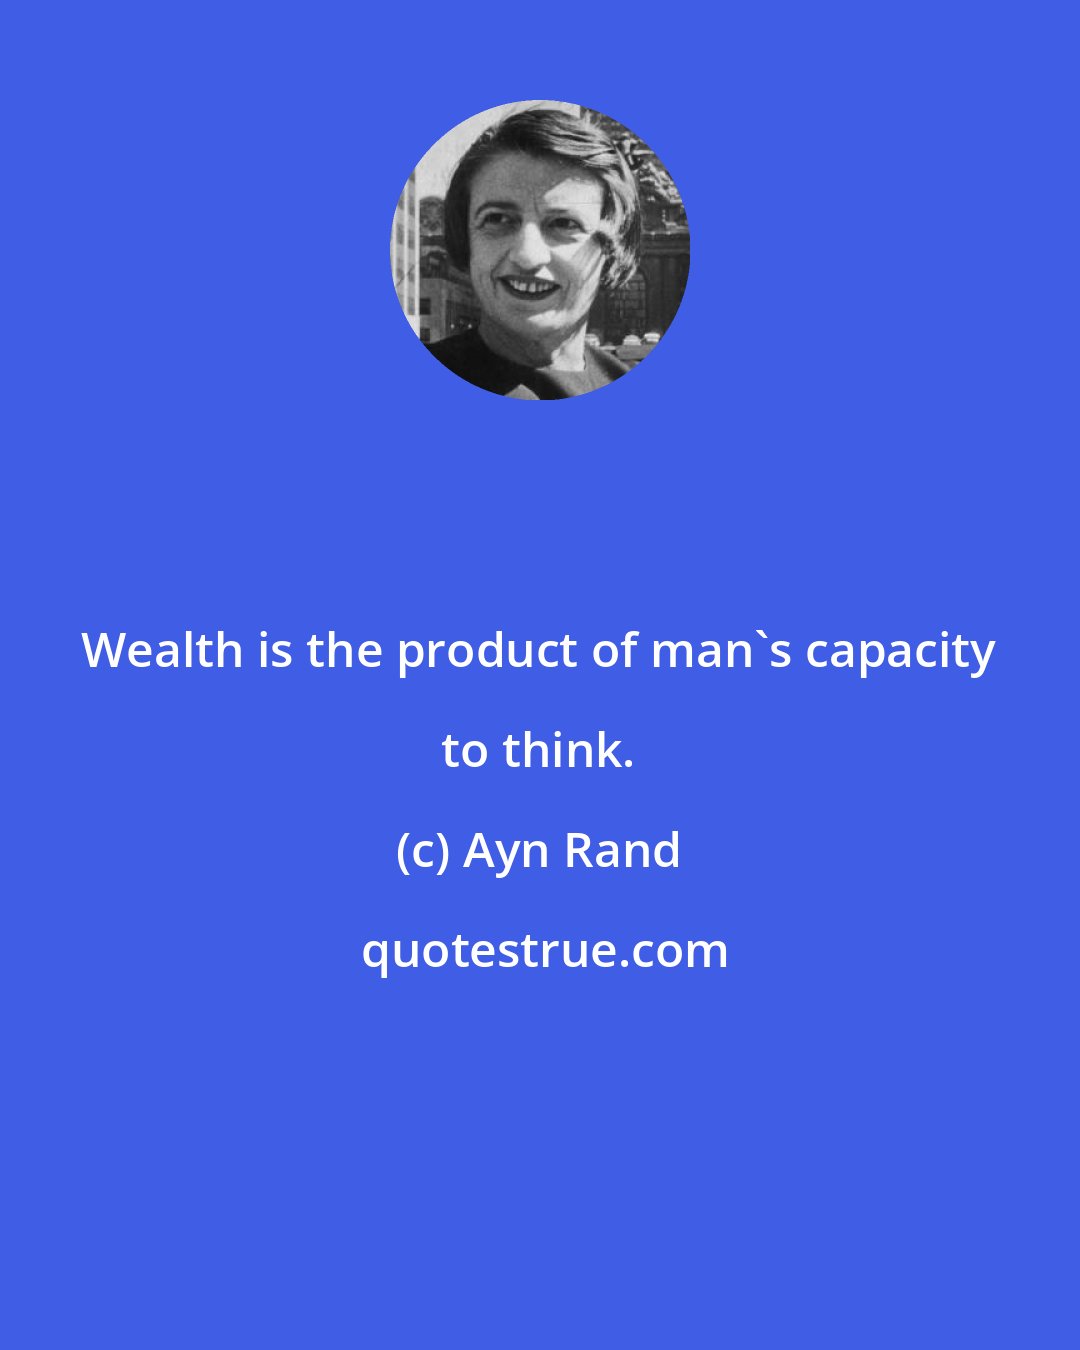 Ayn Rand: Wealth is the product of man's capacity to think.